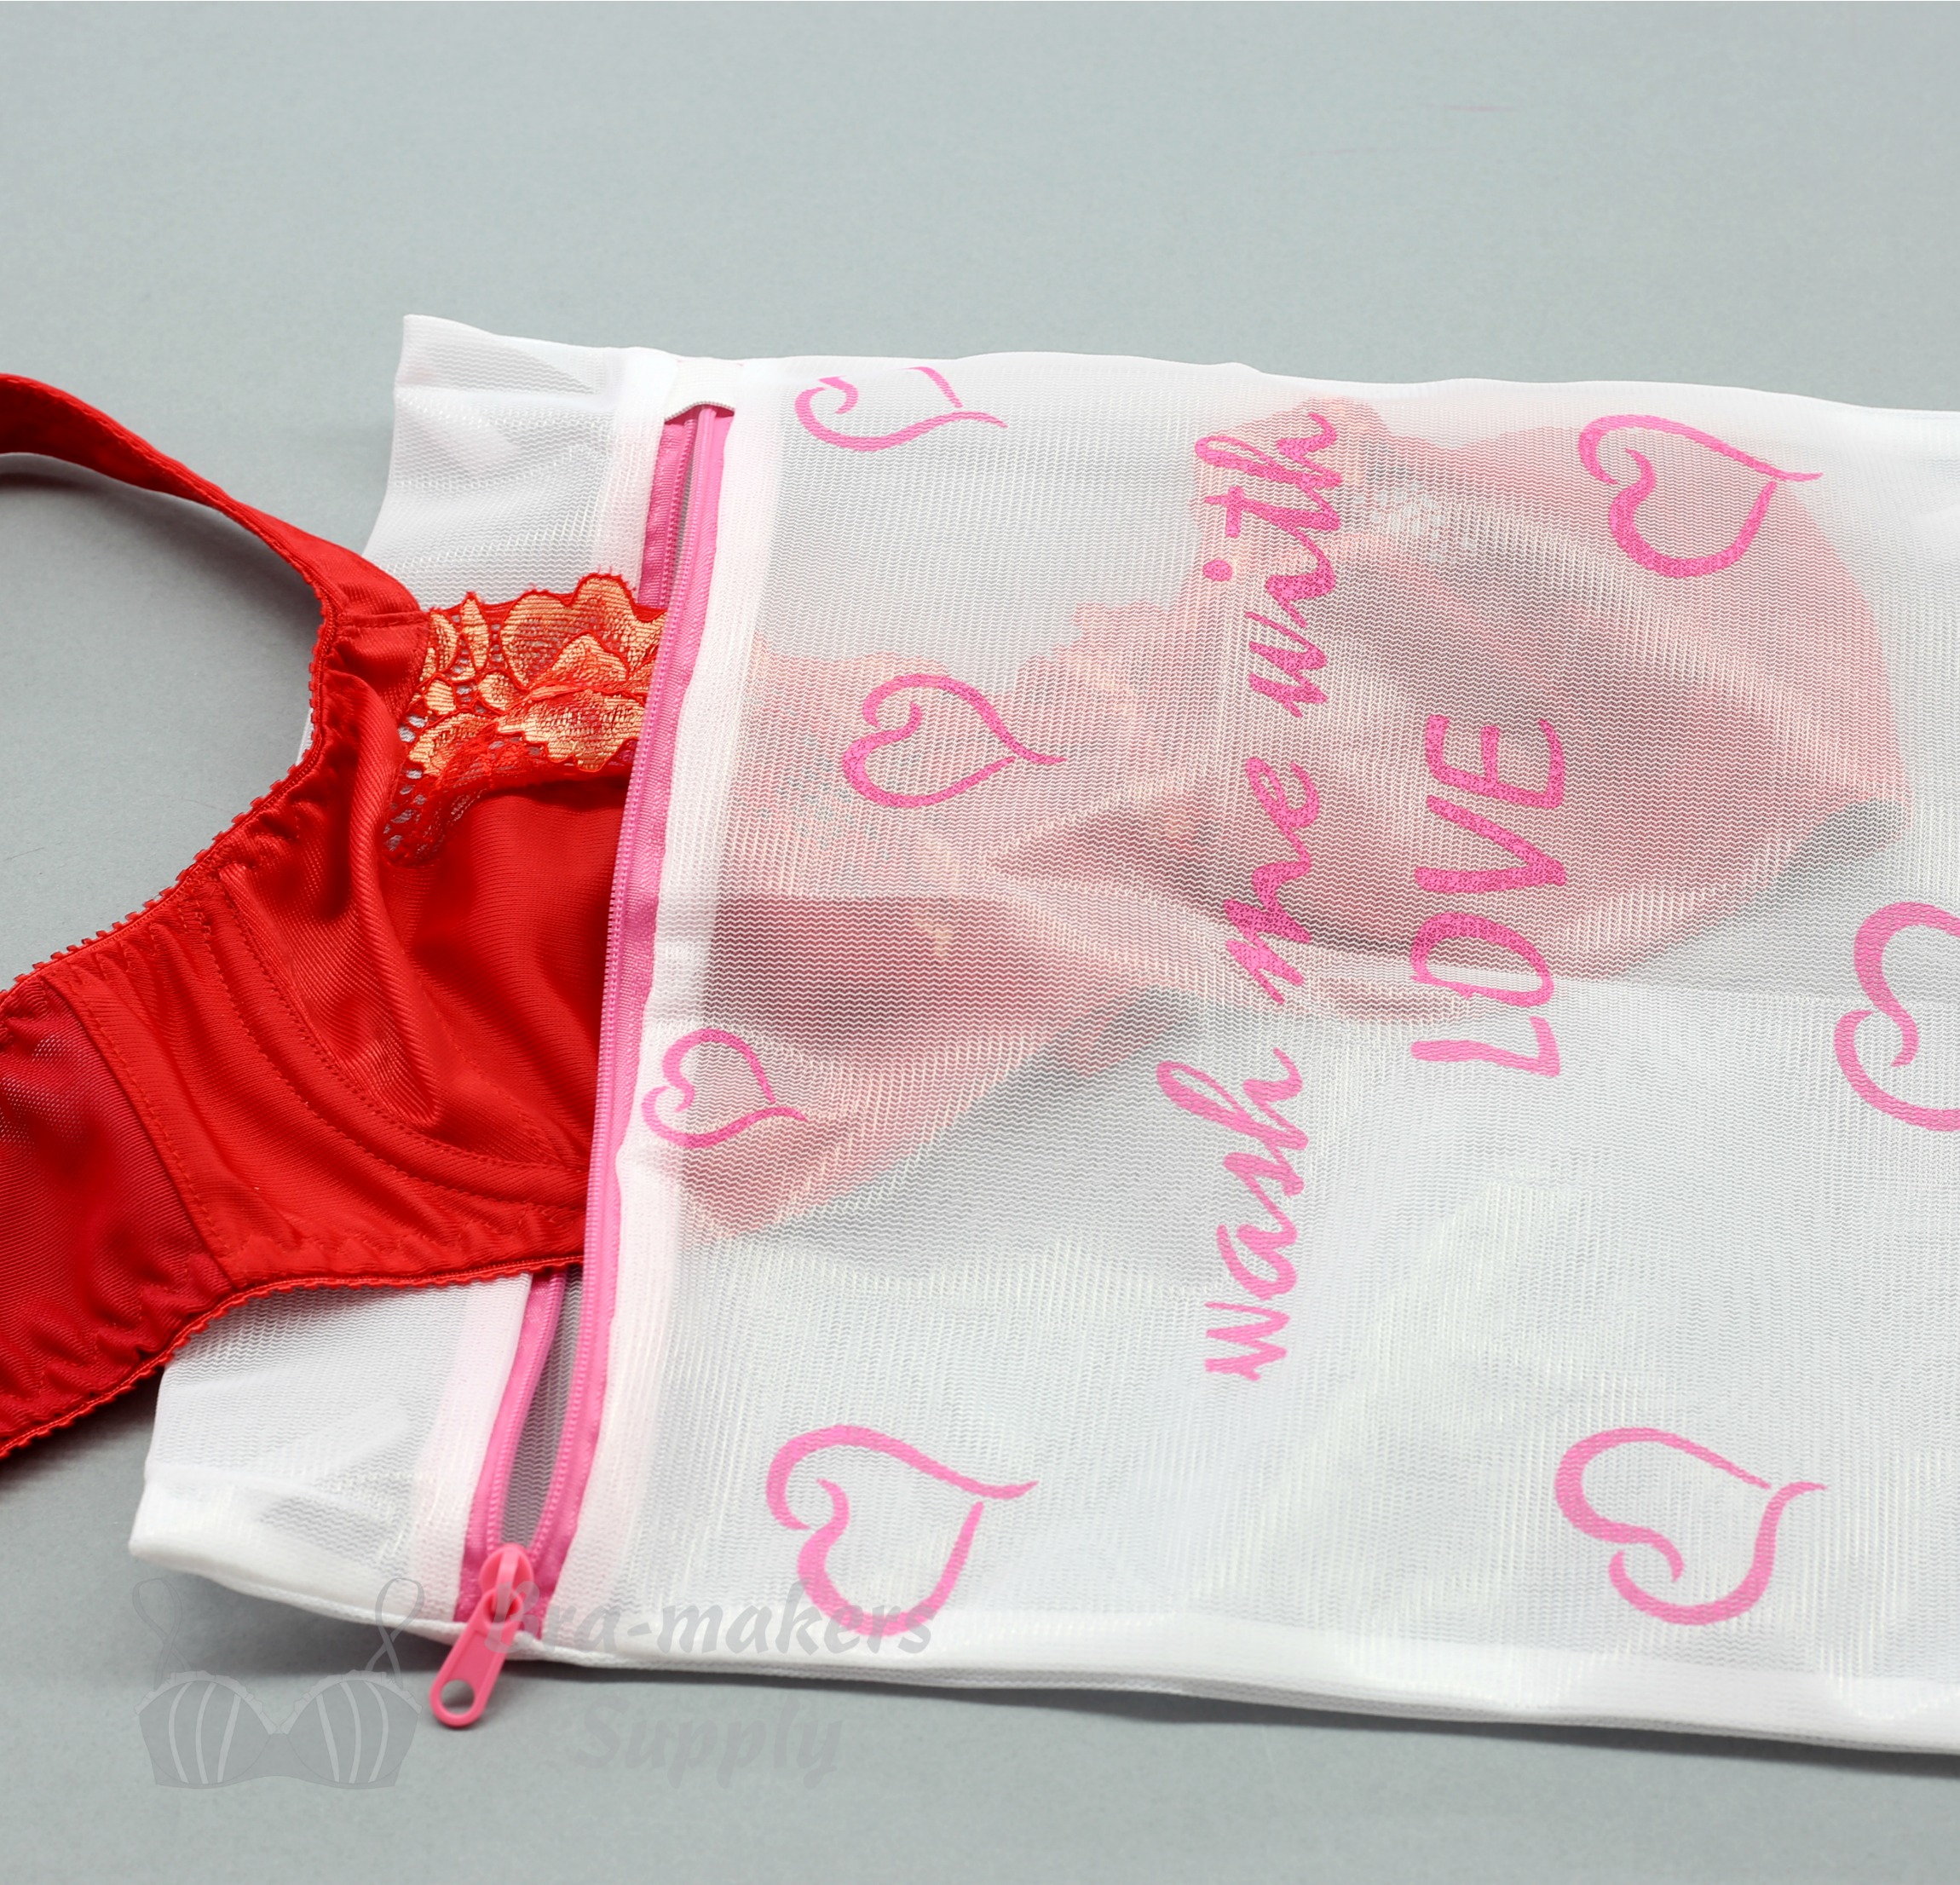 Lingerie Laundry Bag - perfect size for washing all your delicates